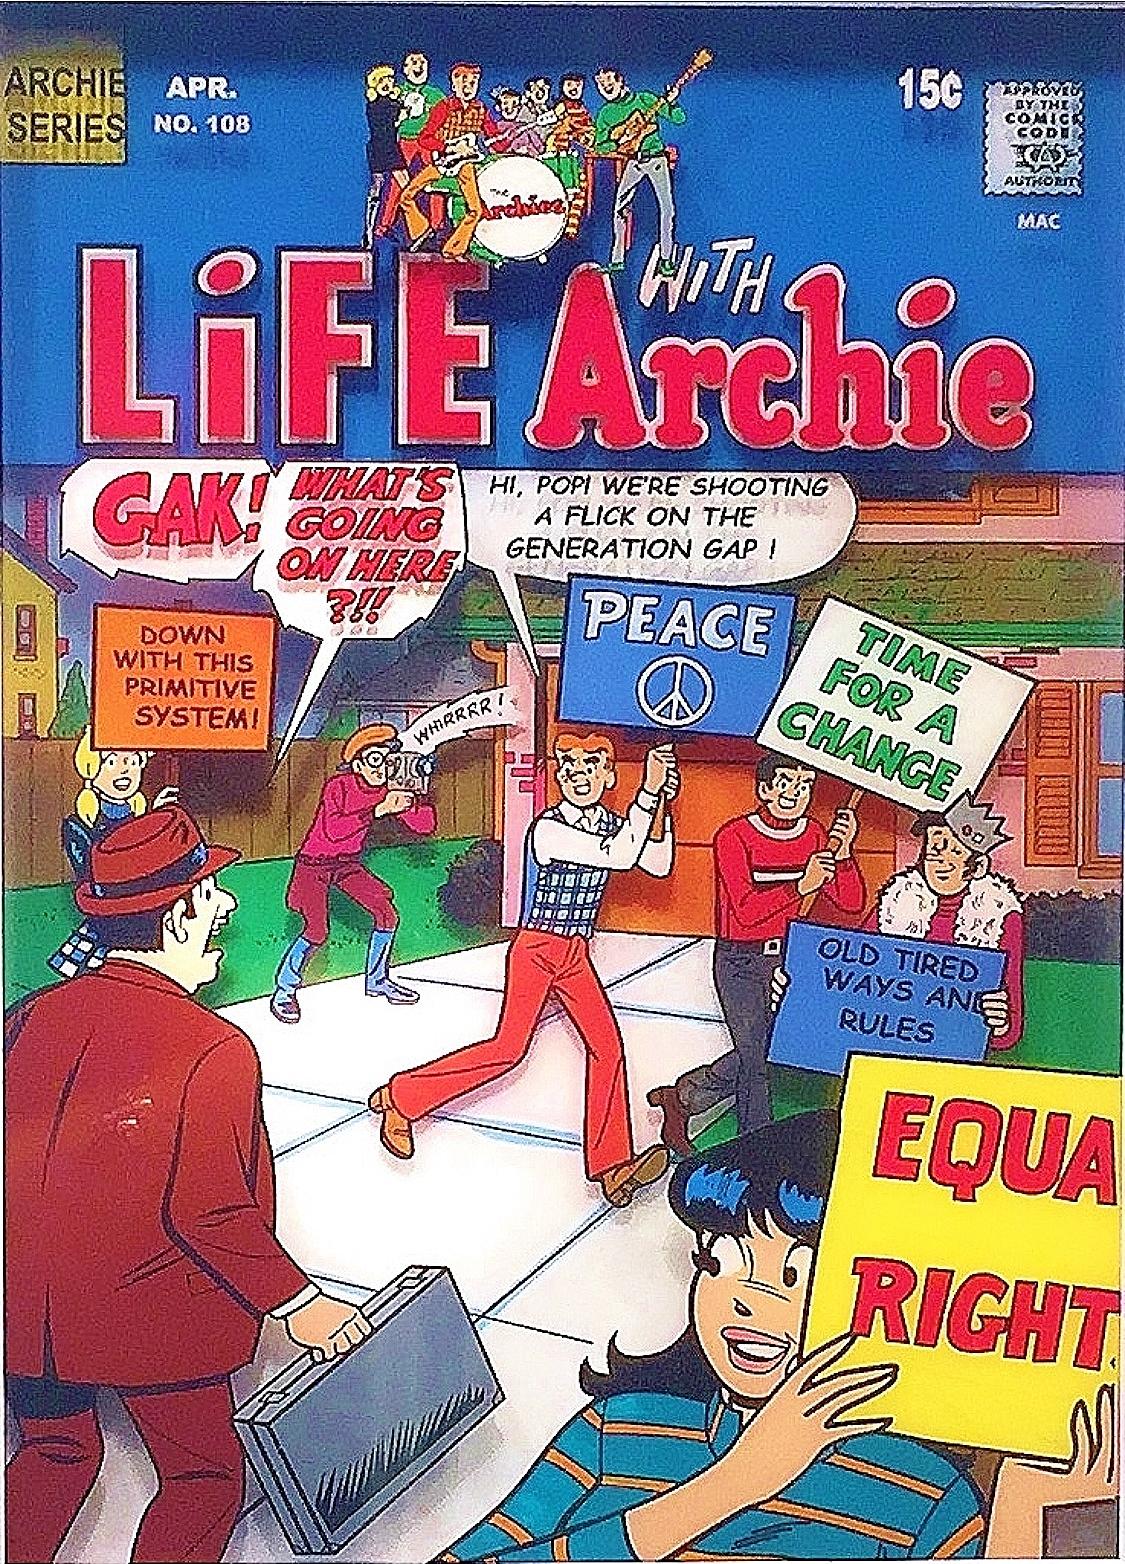 Life with Archie, Volume 1, #178, 1971 - Art by Michael Suchta